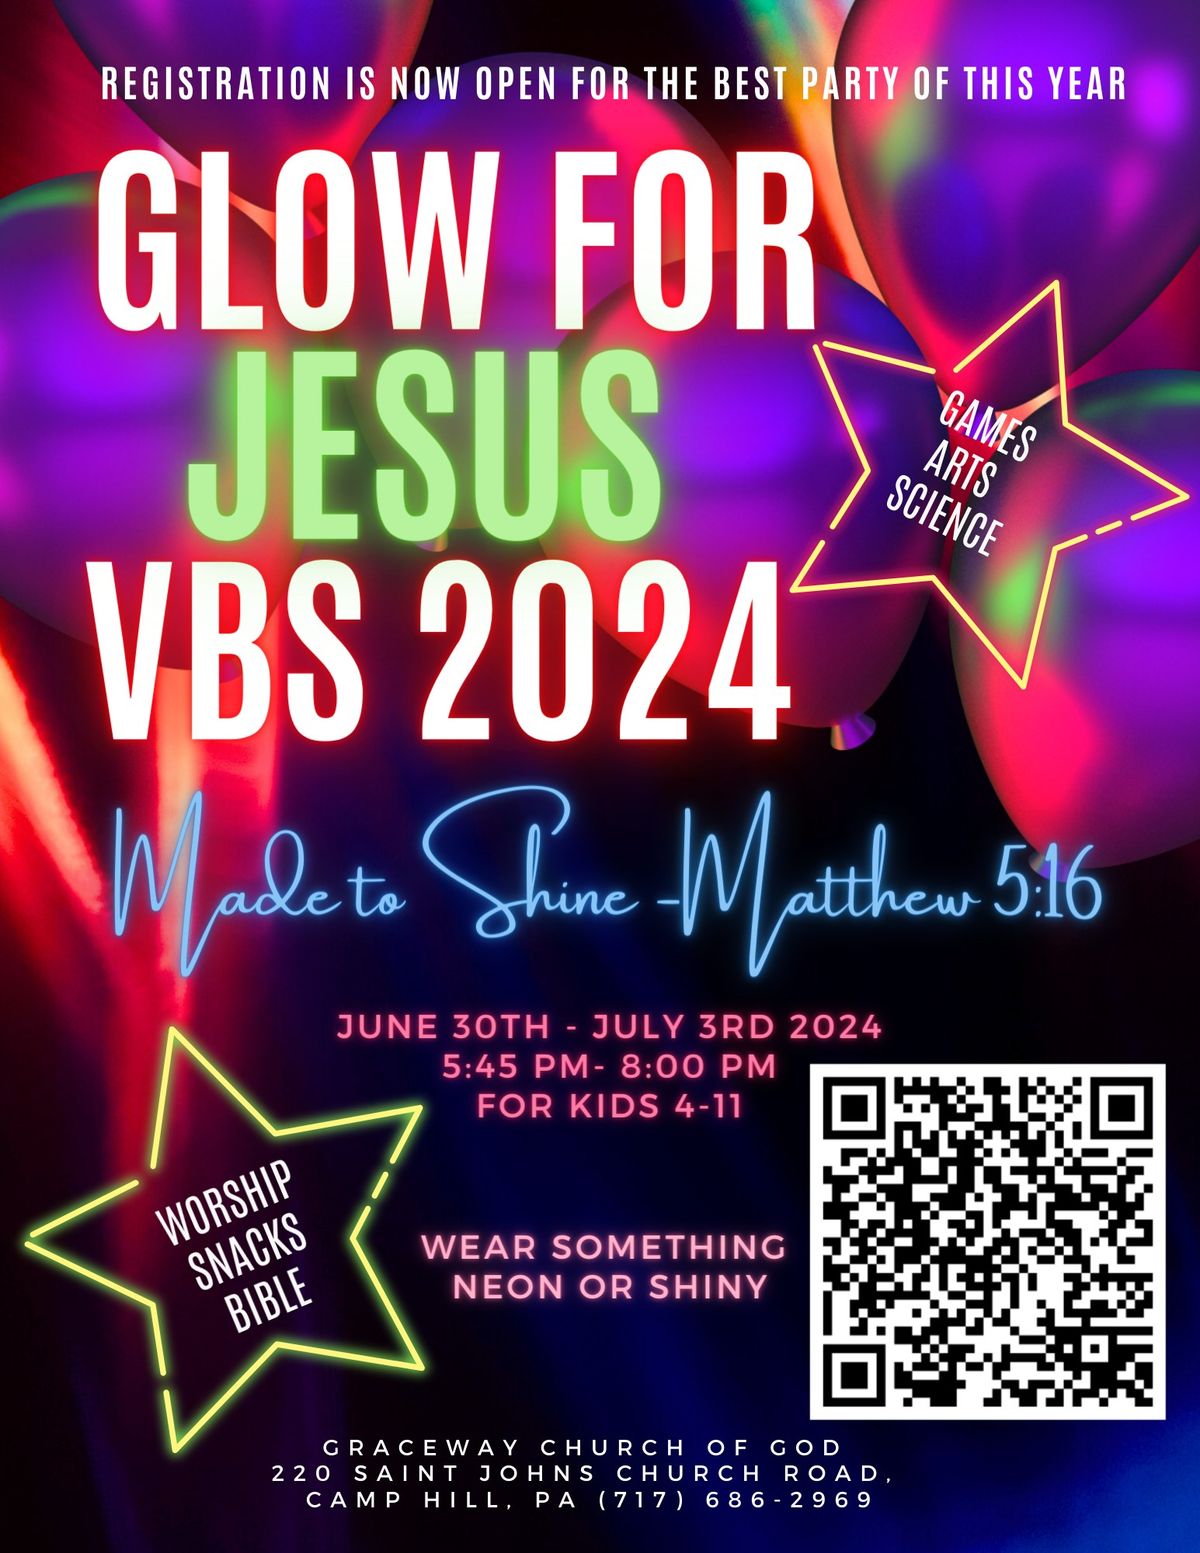 Glow For Jesus VBS 